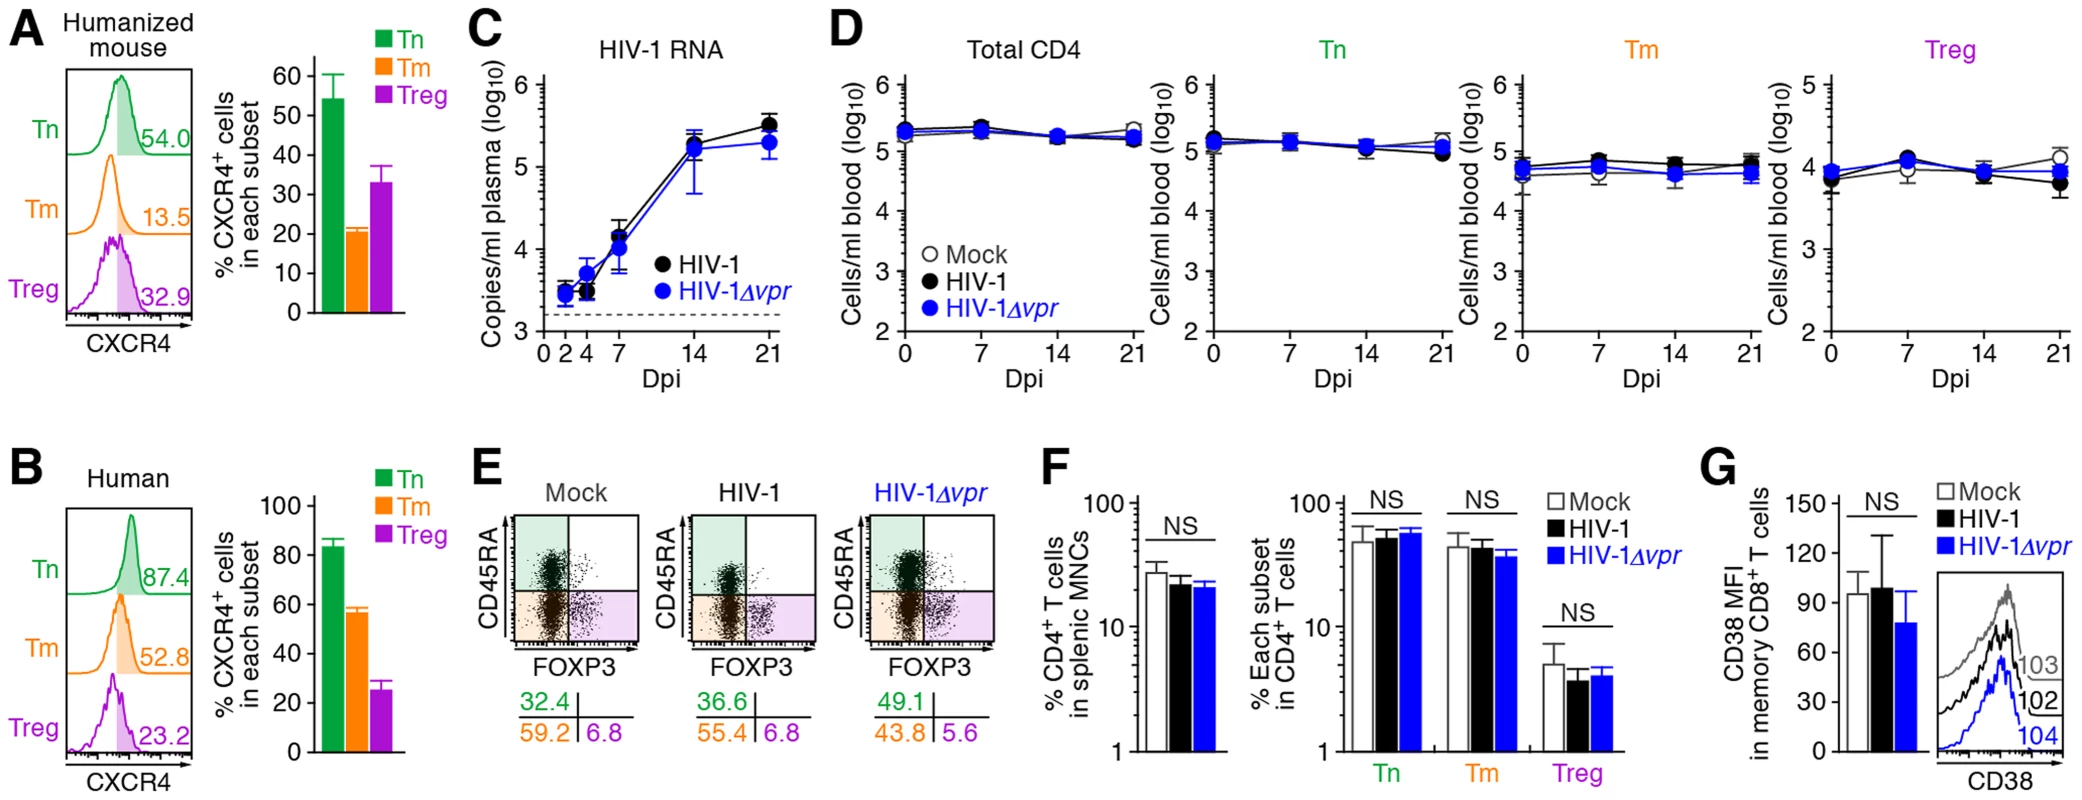 Dynamics of X4 WT and <i>vpr</i>-deficient HIV-1 infection in humanized mice.